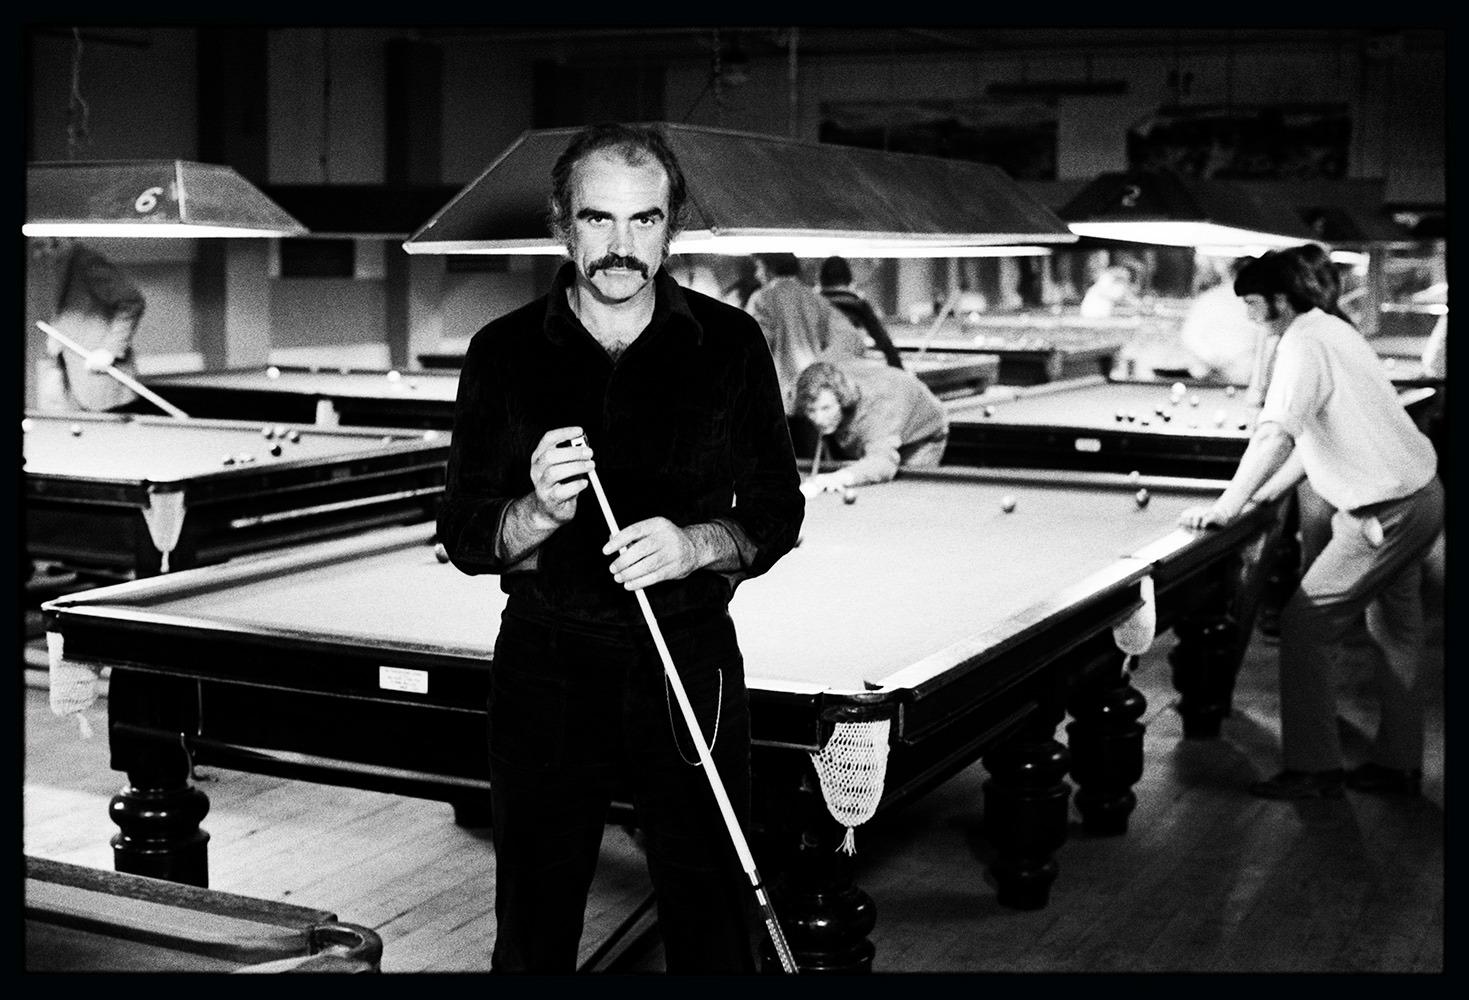 Sean Connery Snooker – County Wicklow, Ireland, 1973 Limited Estate Print 